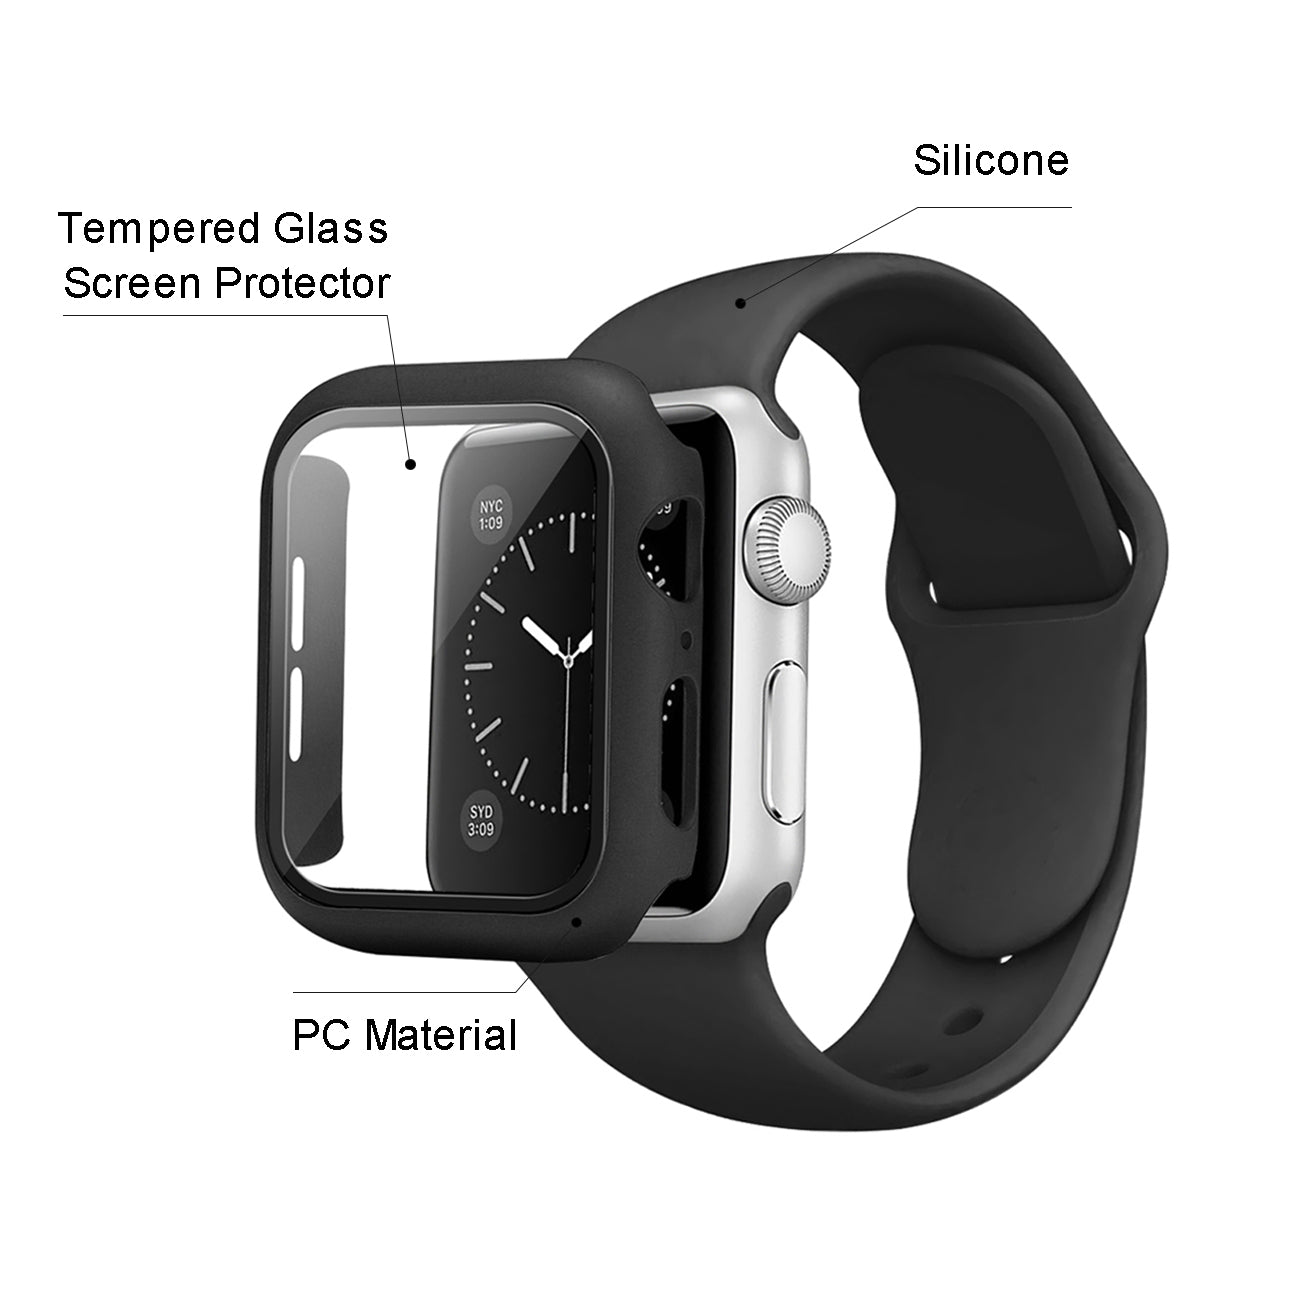 Watch Case PC With Glass Screen Protector, Silicone Watch Band Apple Watch 42mm Black Color